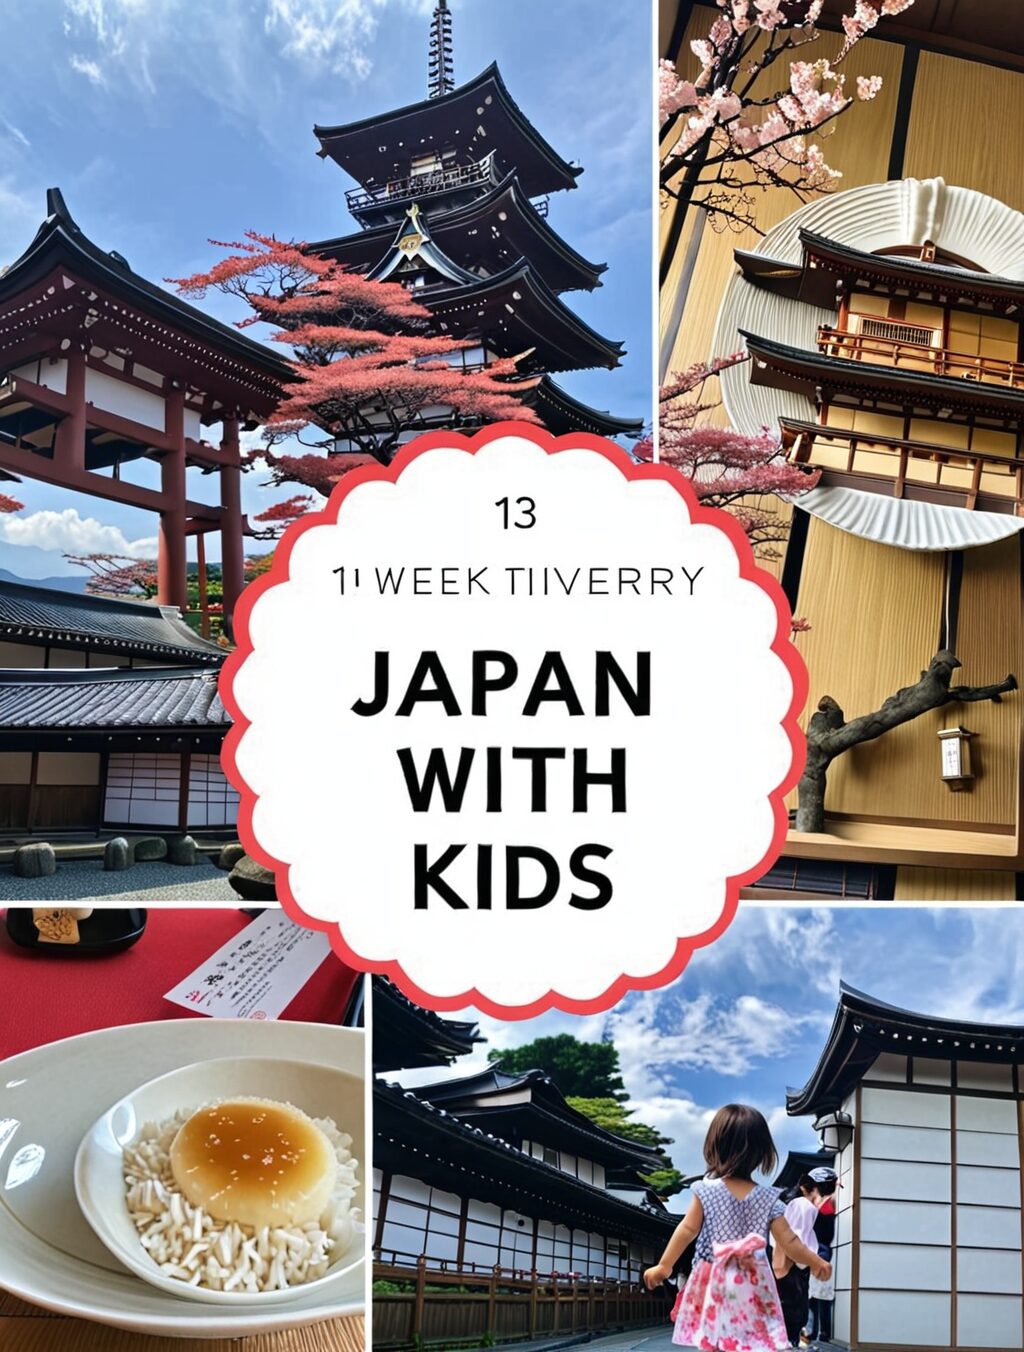 1 week itinerary japan with kids